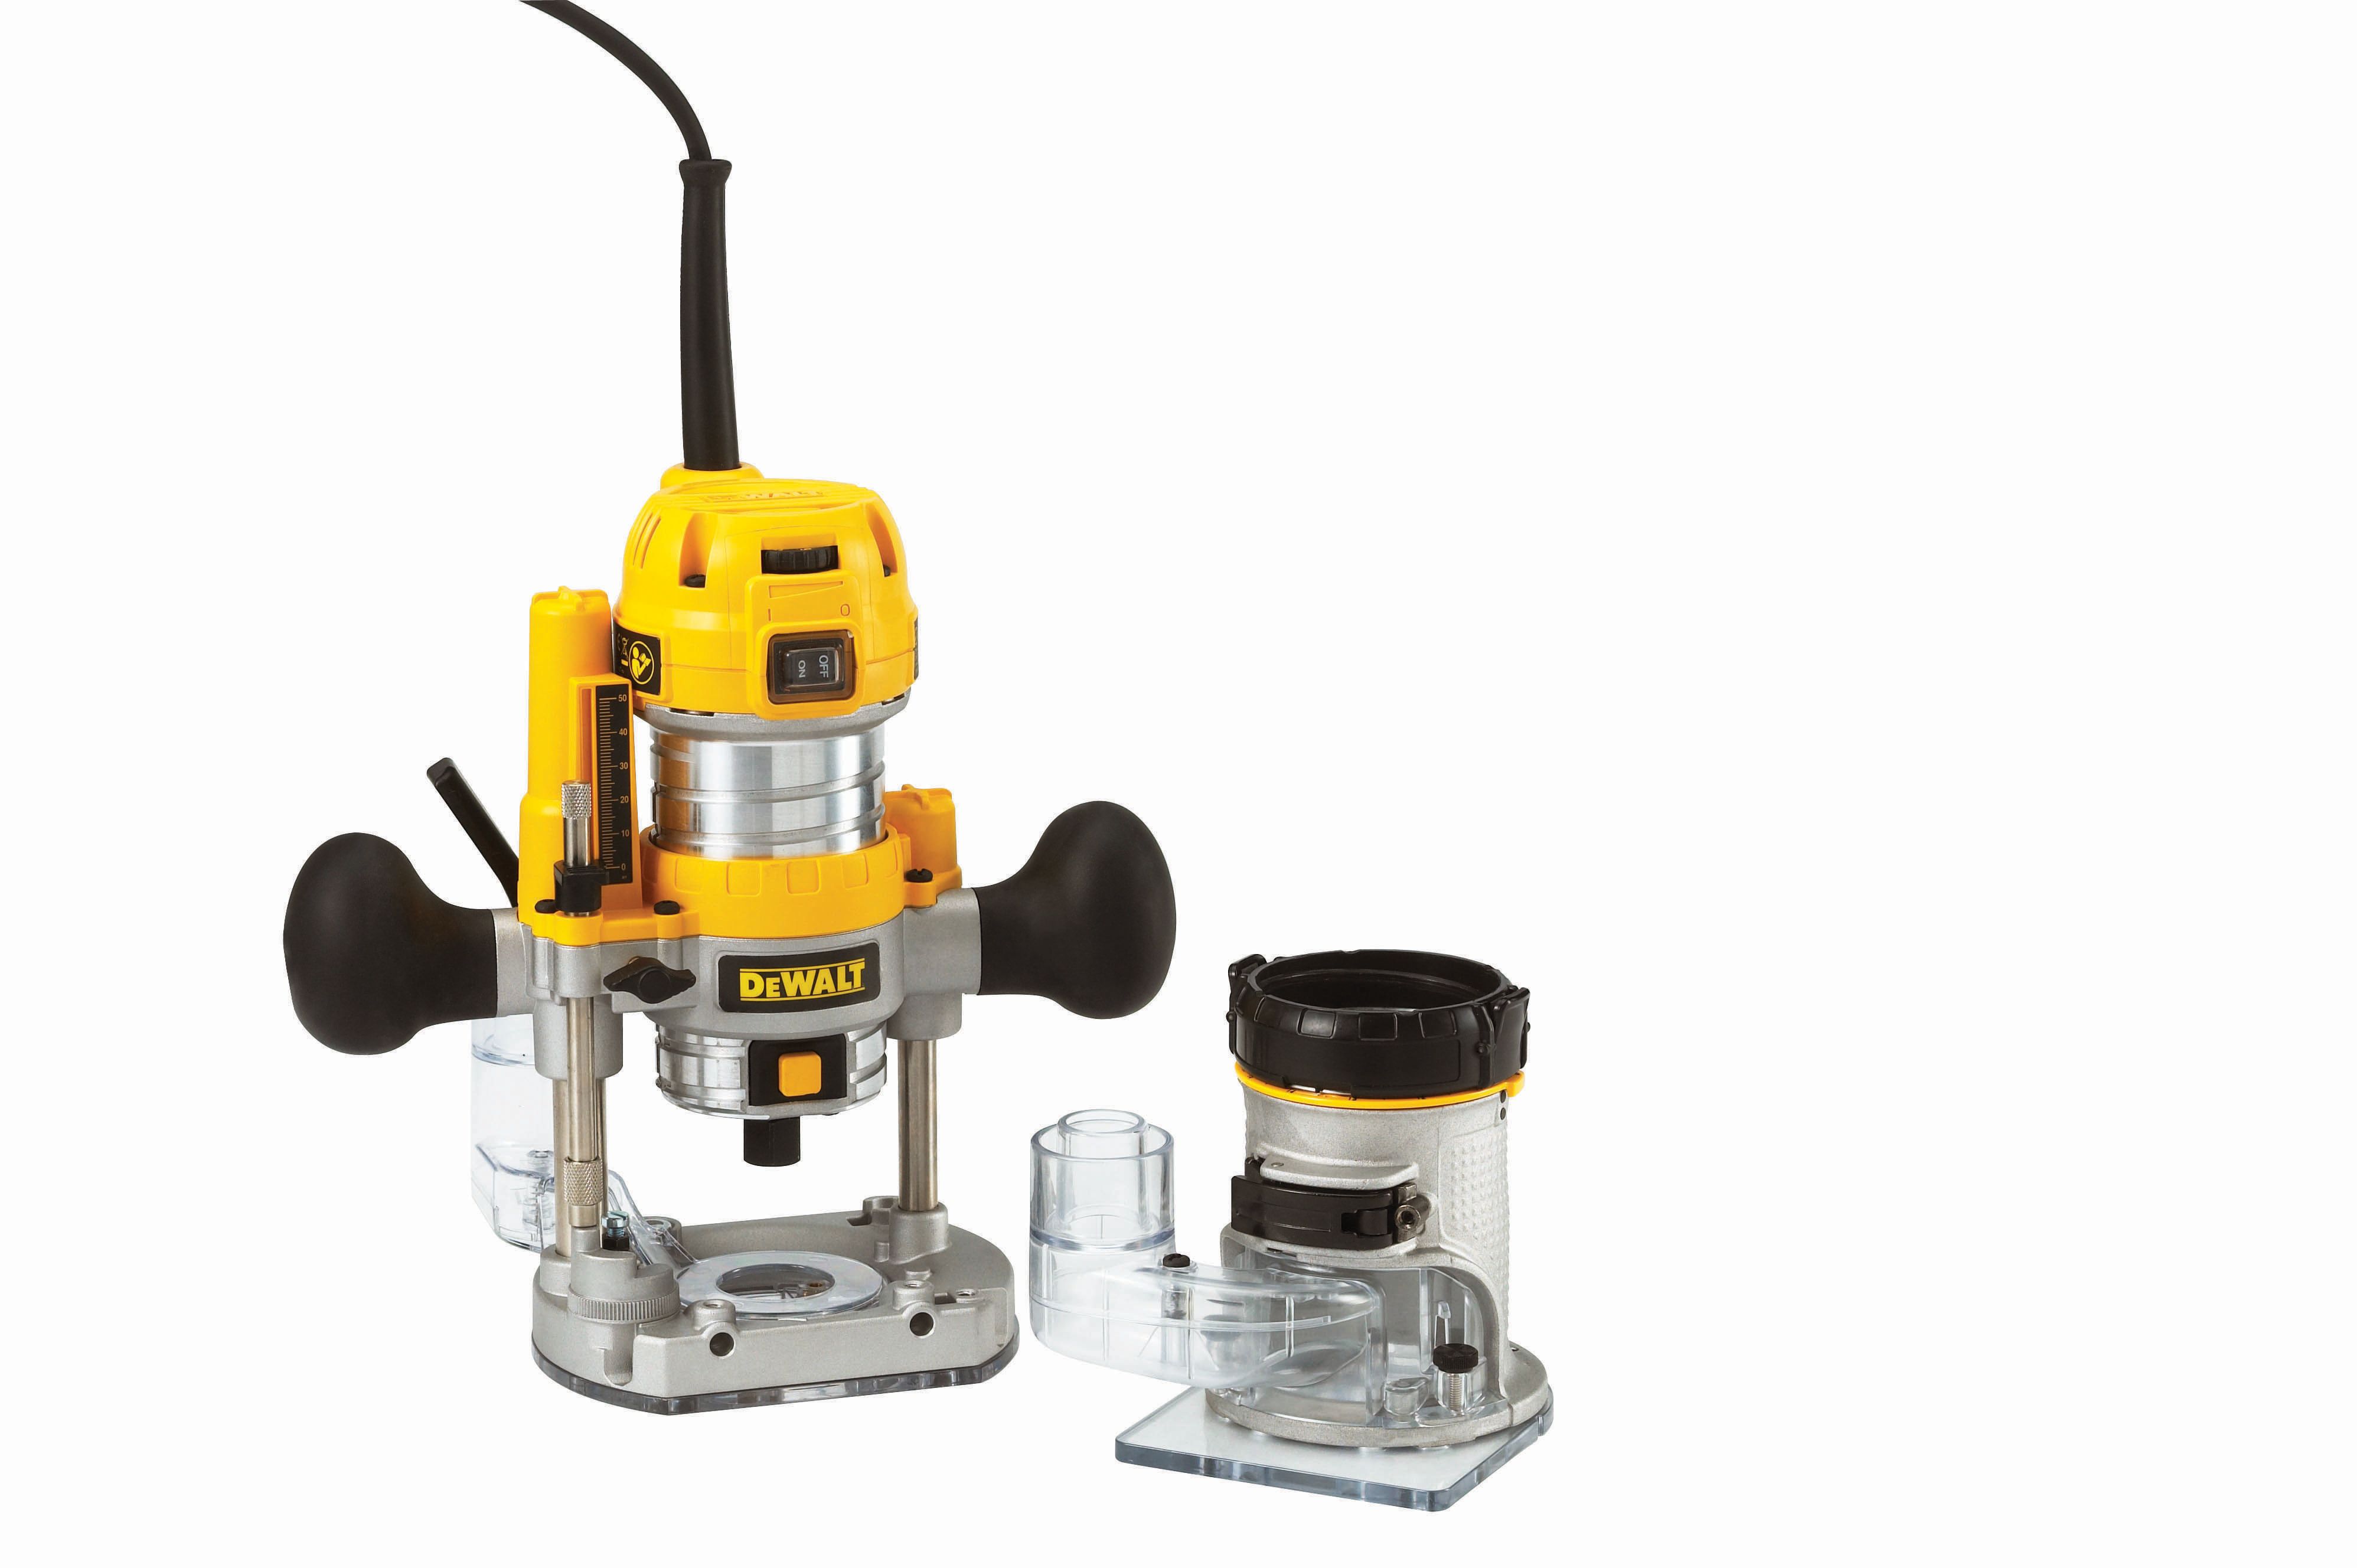 Image of DEWALT D26240K-GB 1/4in Combination Plunge & Fixedbase Corded Router 230V - 900W